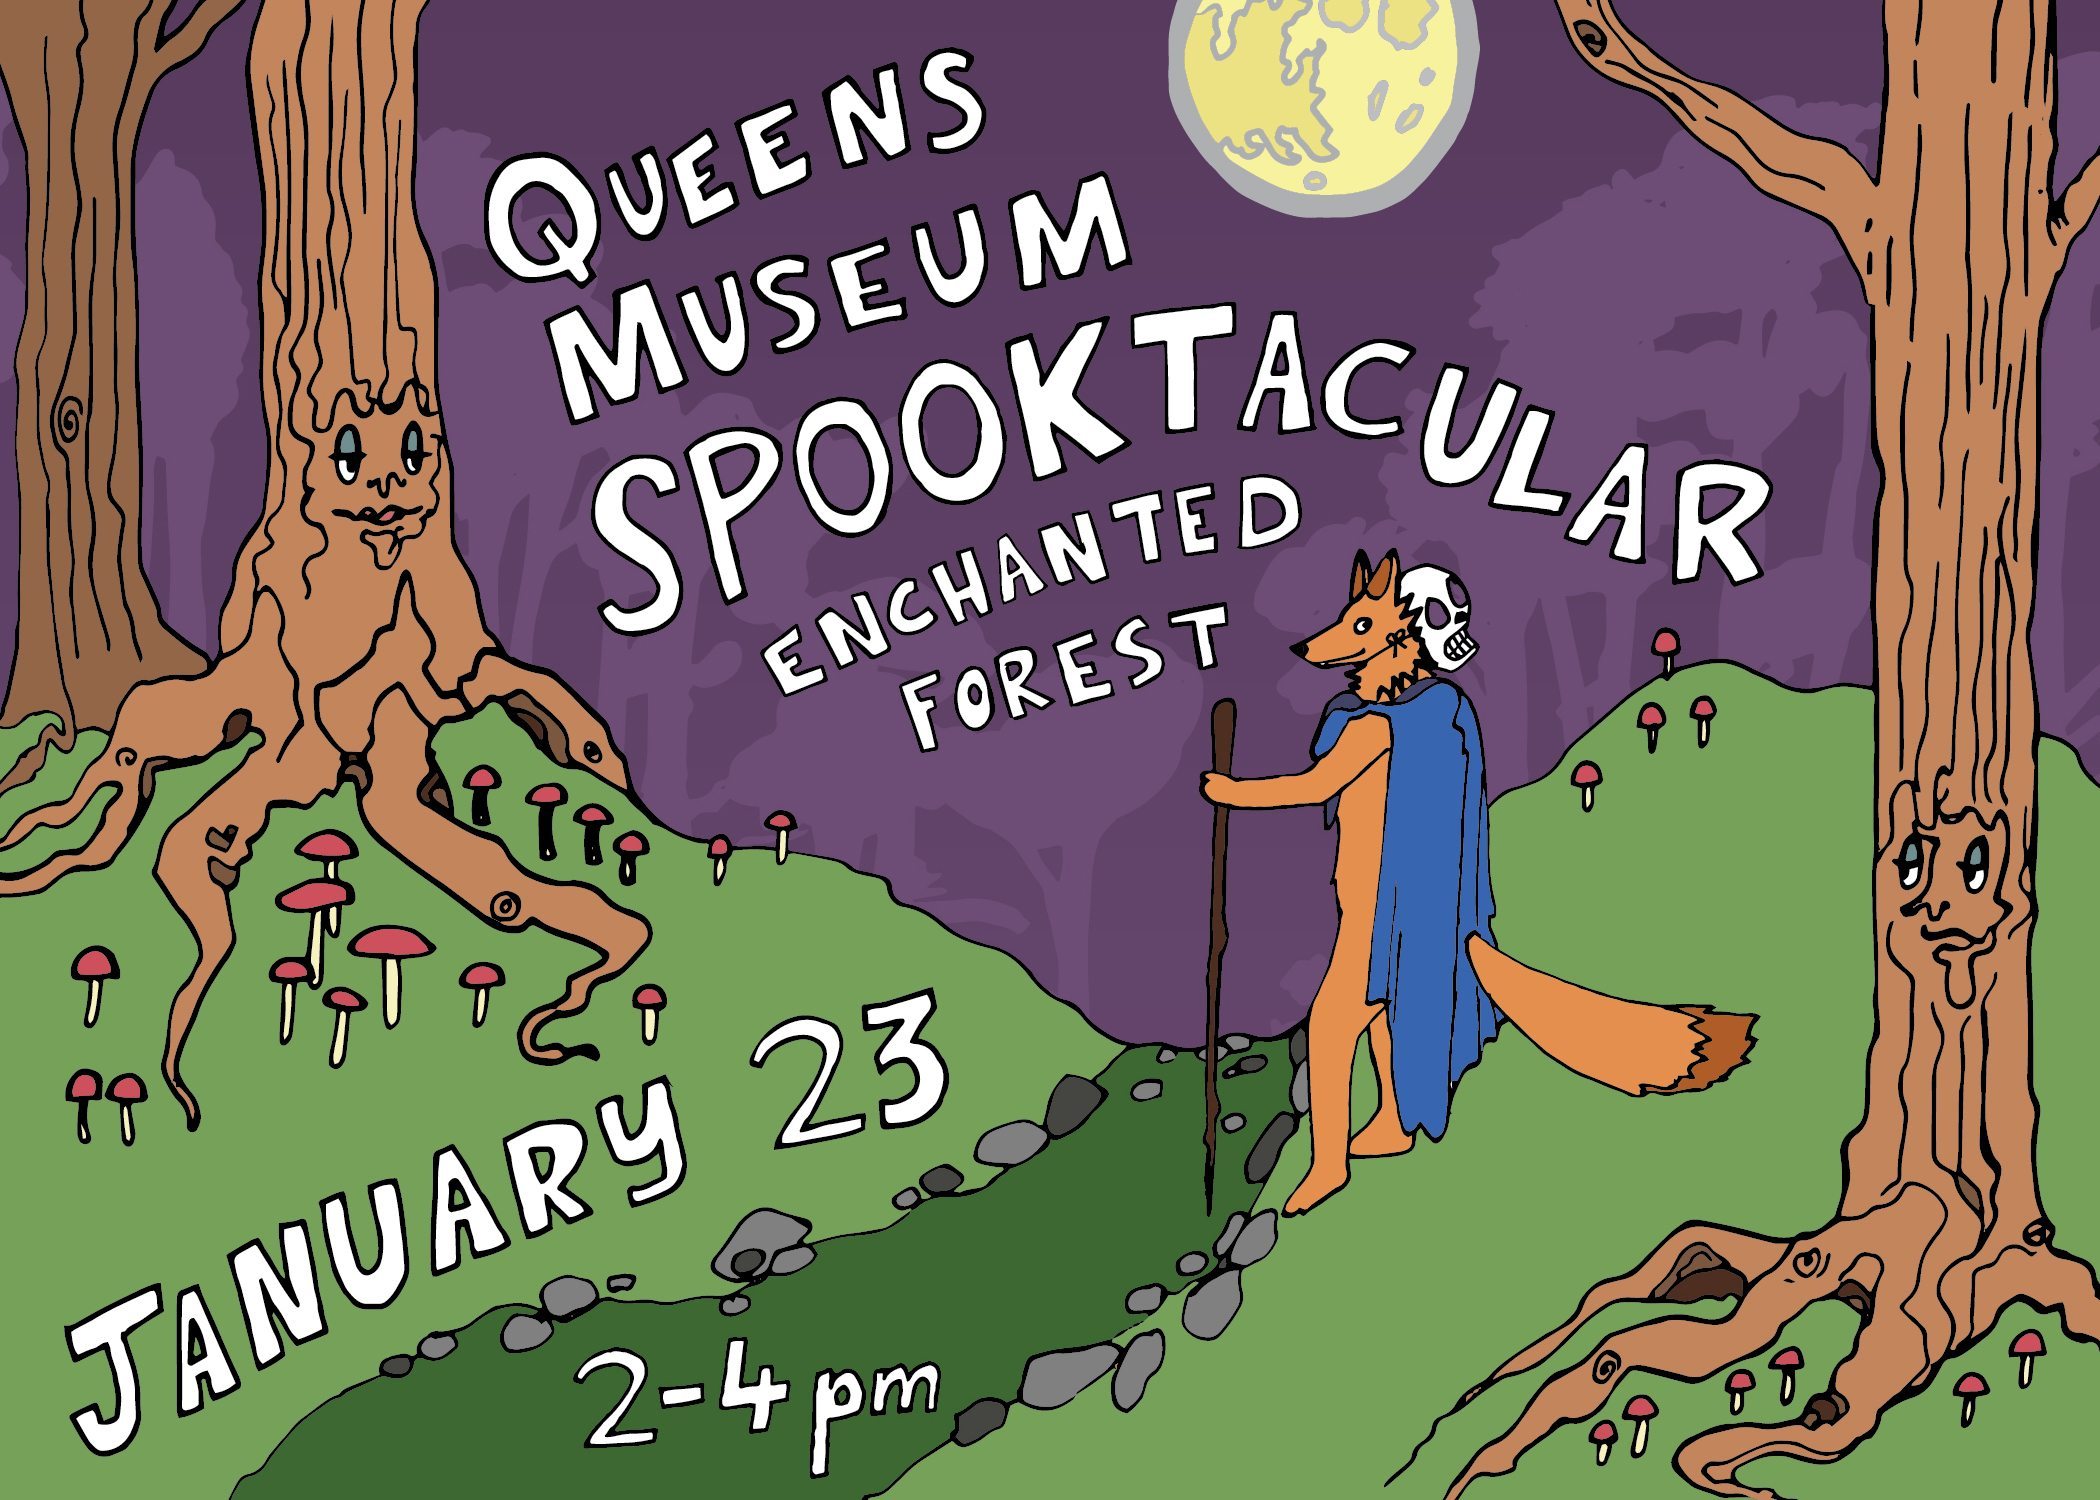 Boo! Spooktacular Enchanted Forest at the Queens Museum